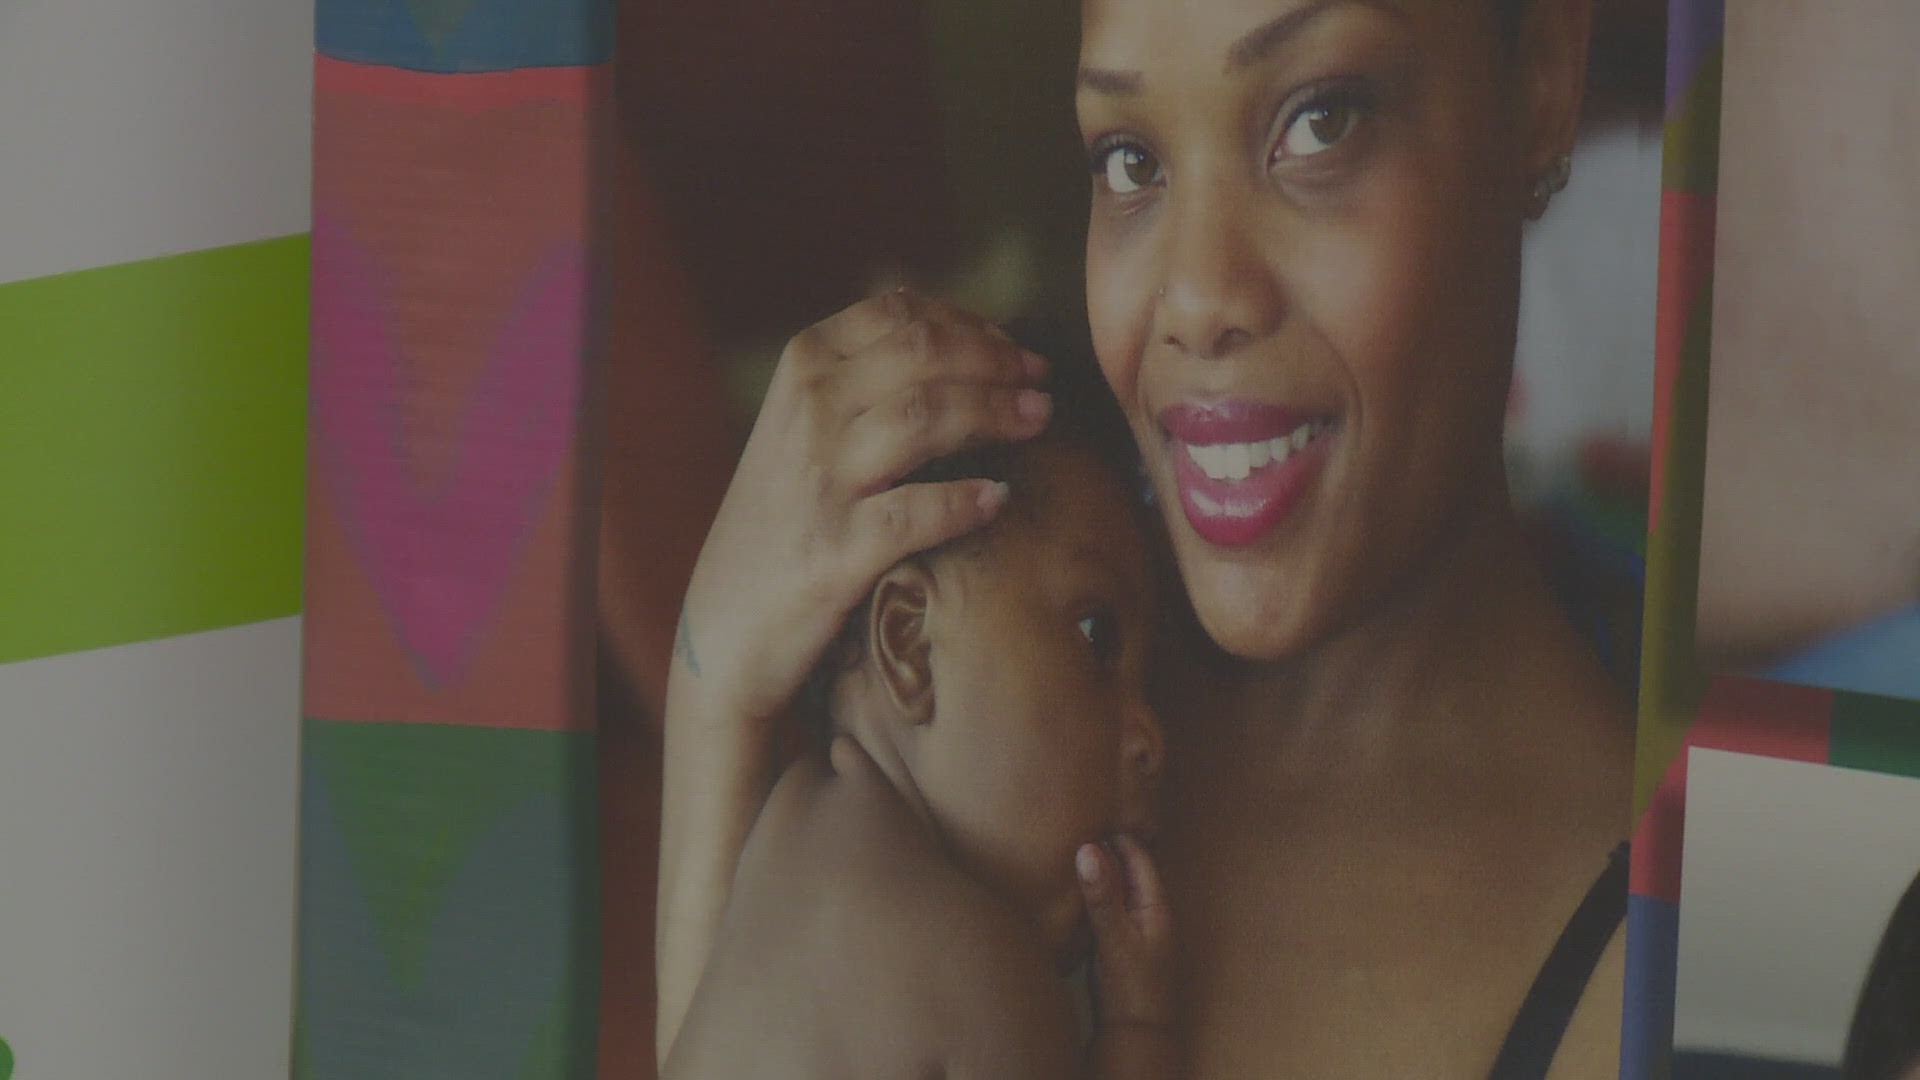 Soon, those at risk mothers will be part of a new program aimed at combating a statewide problem.